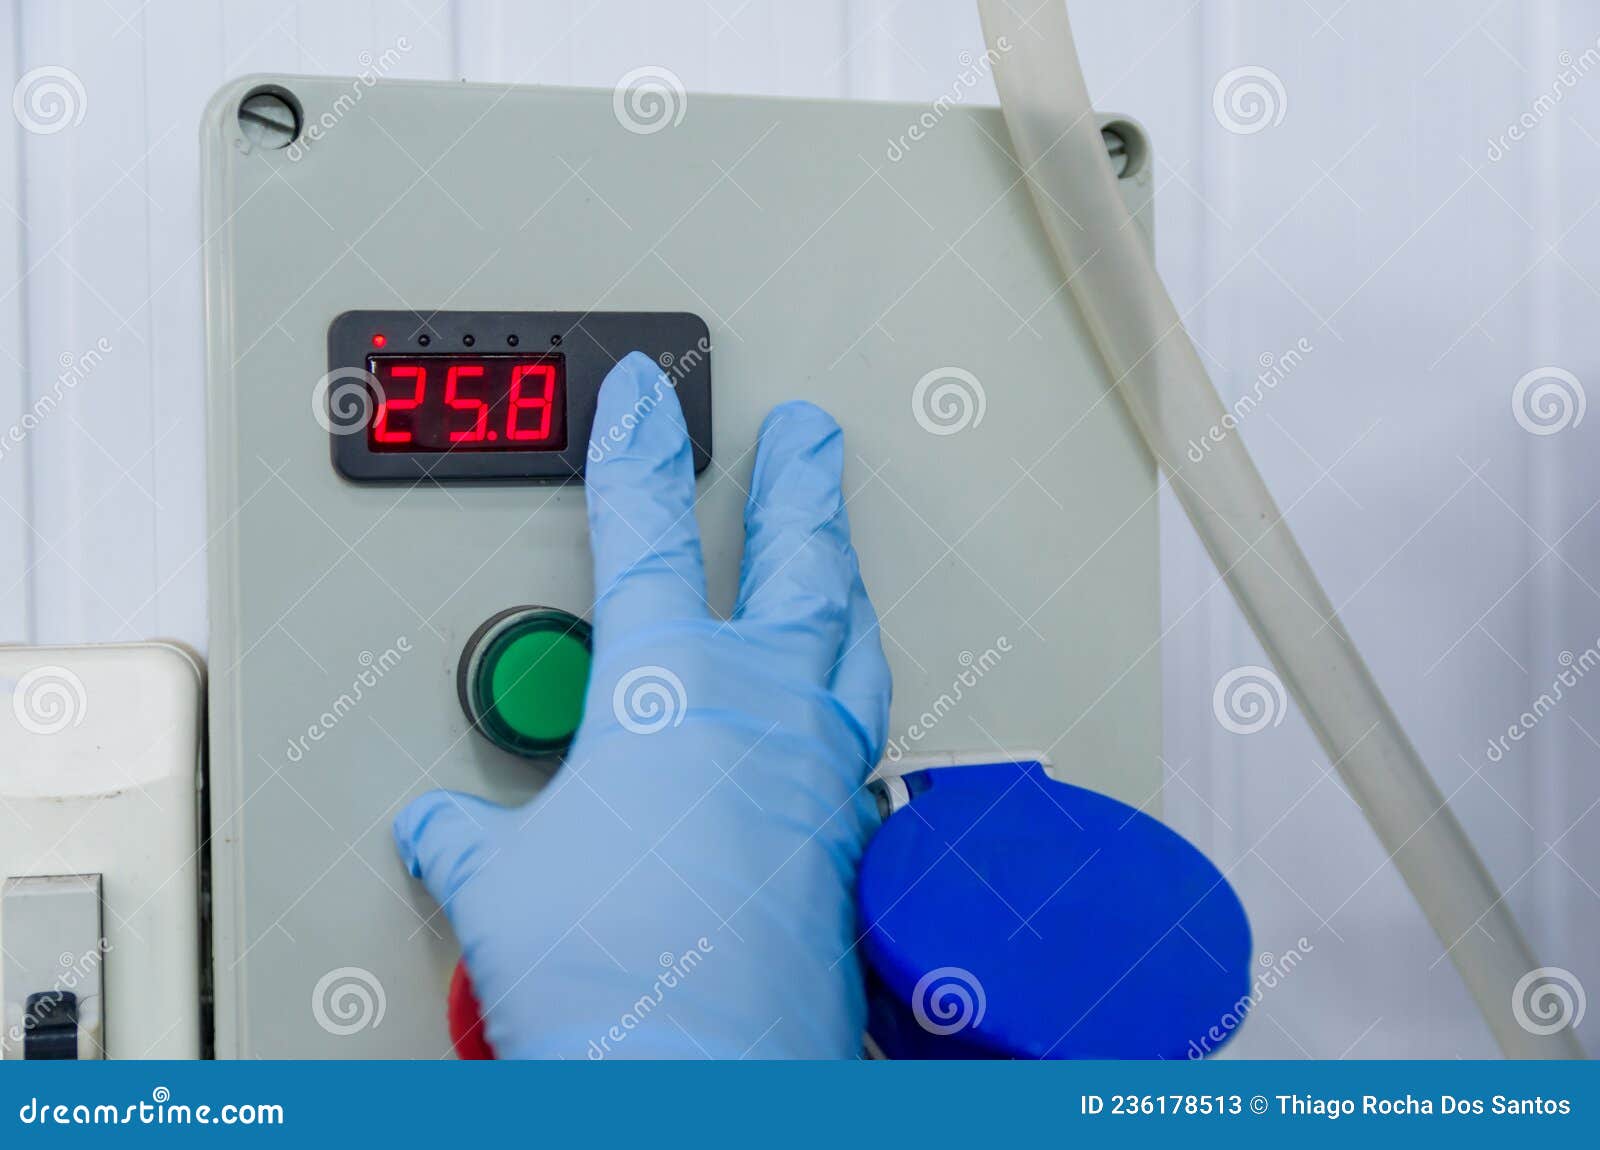 woman working in industry, adjusting tank thermostat